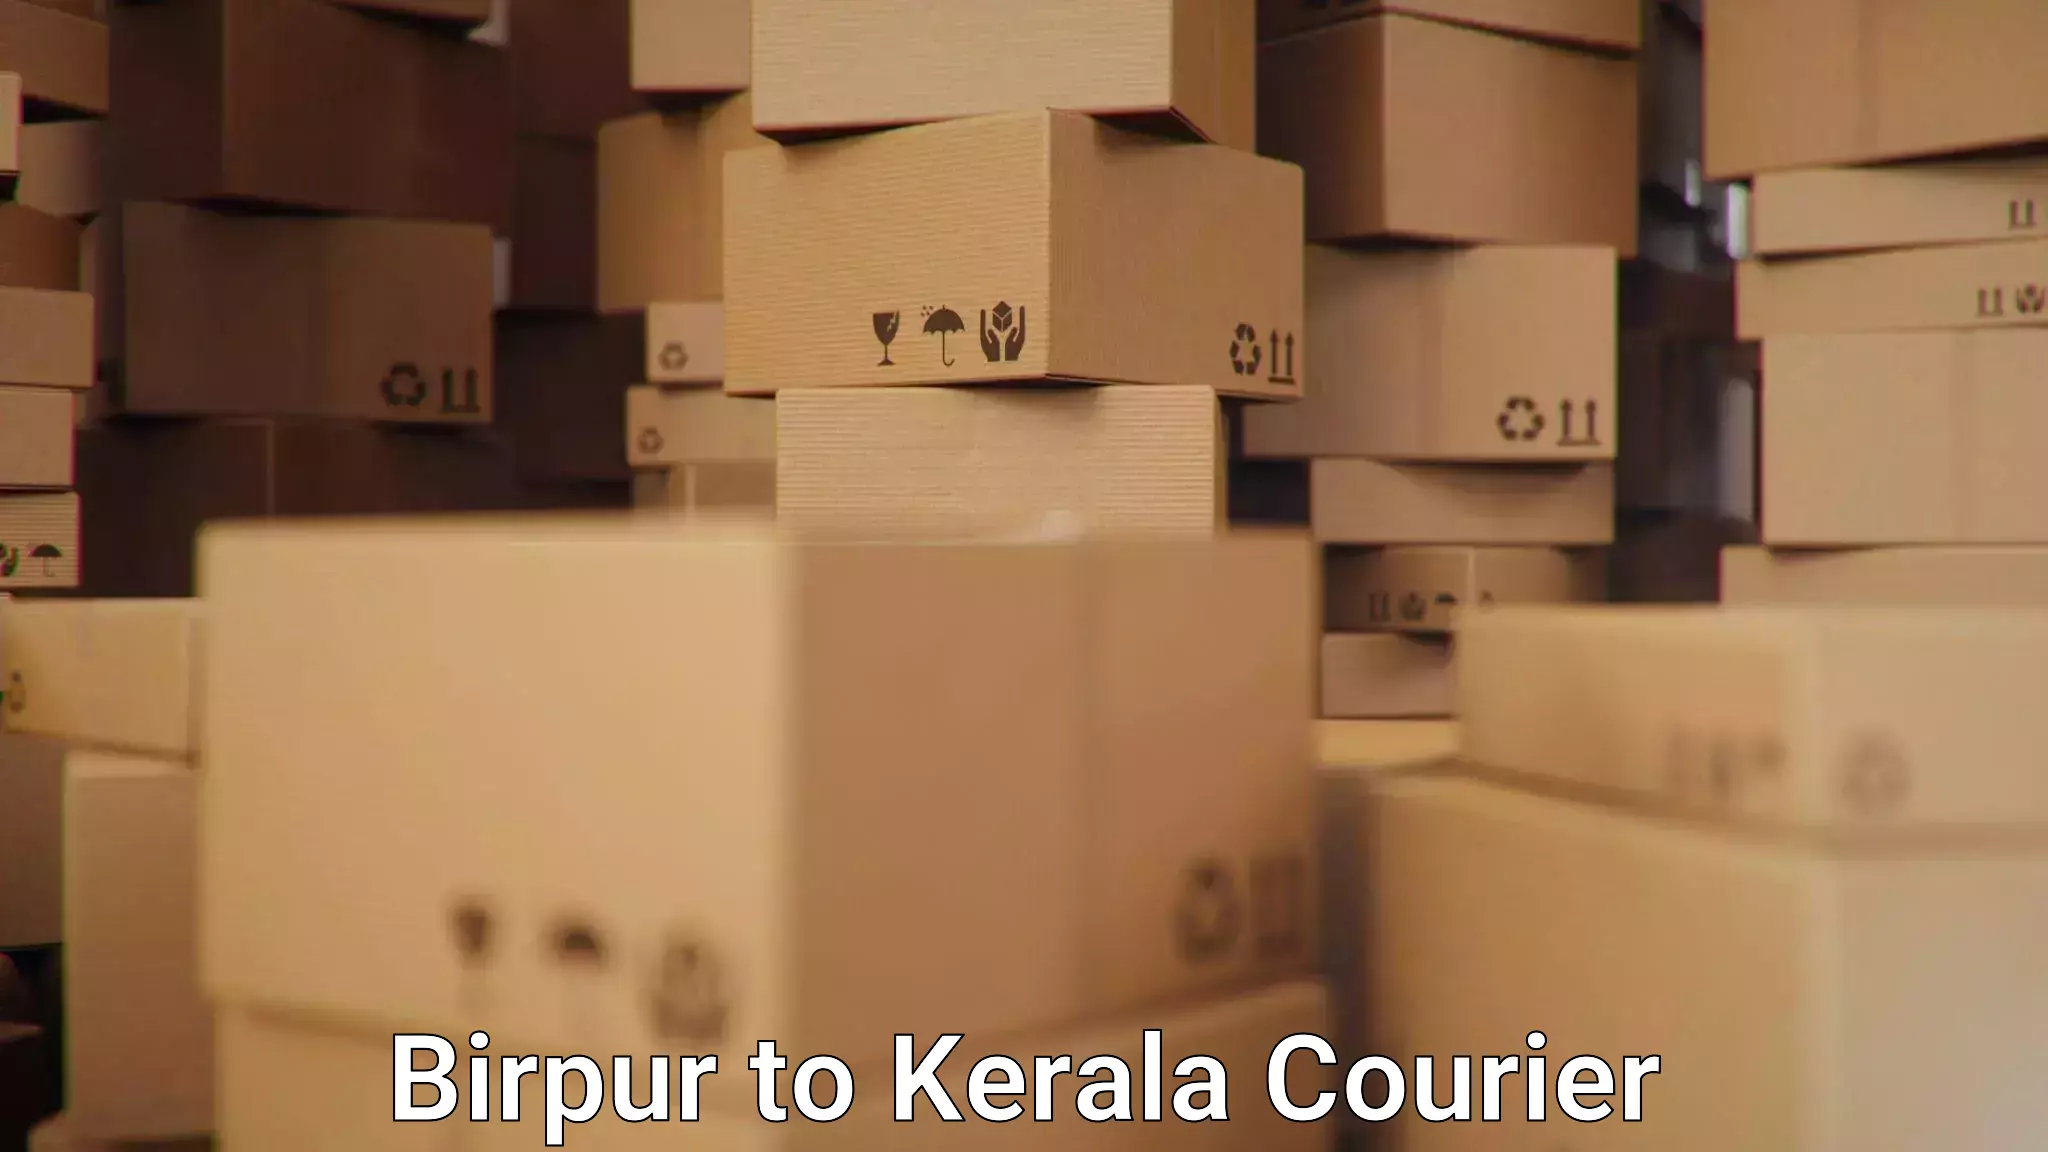 Global courier networks Birpur to Kerala